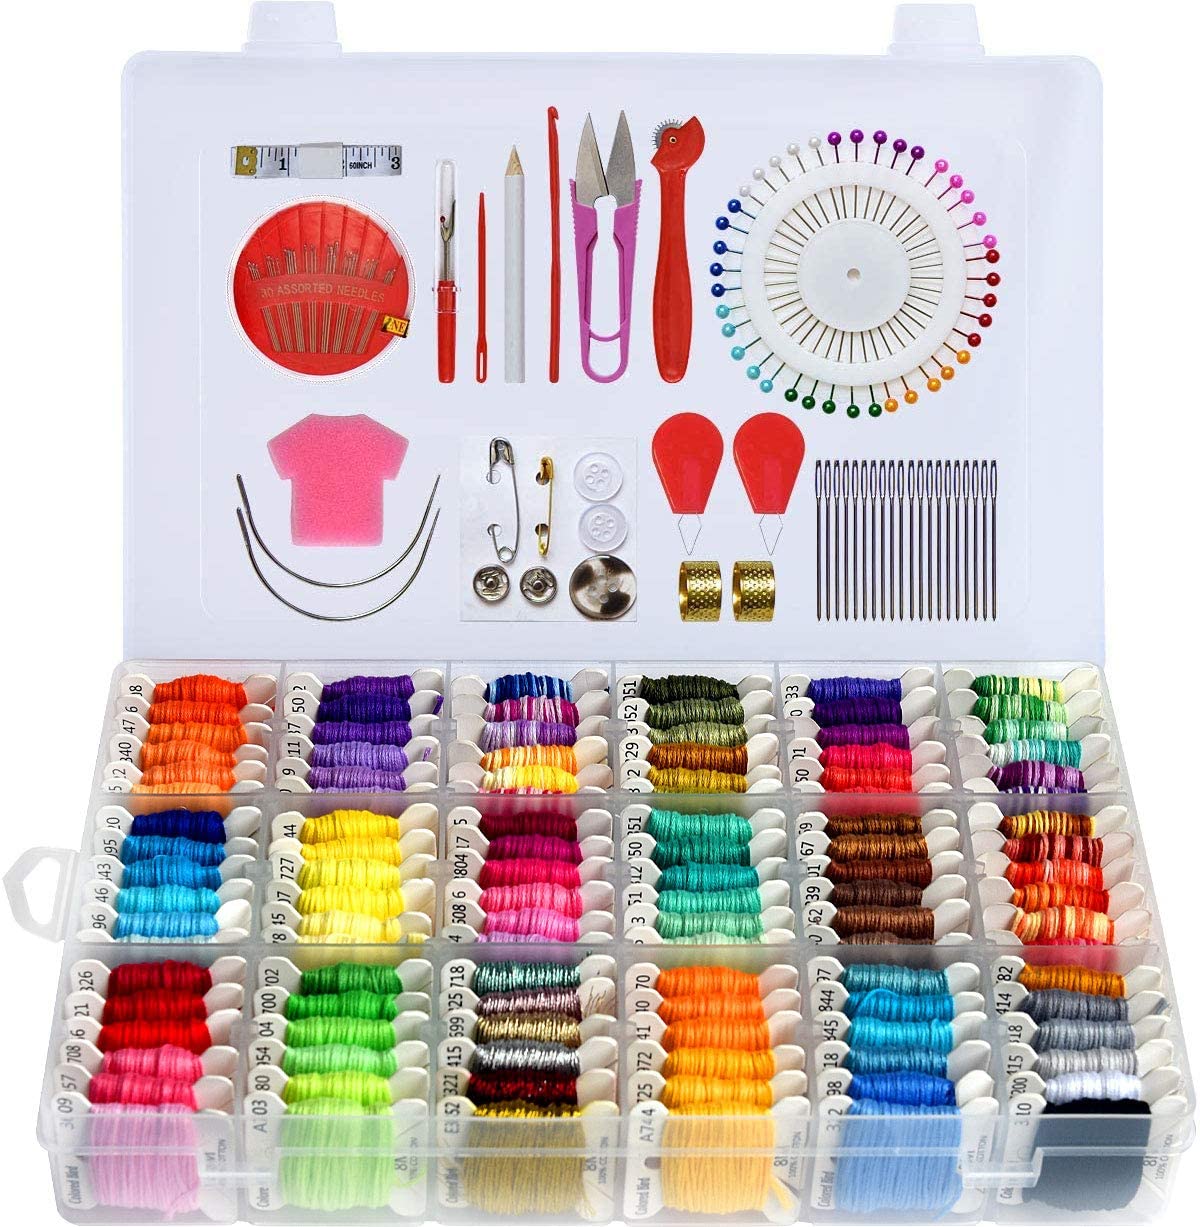 Embroidery Floss Cross Stitch Threads String Kits with Organizer